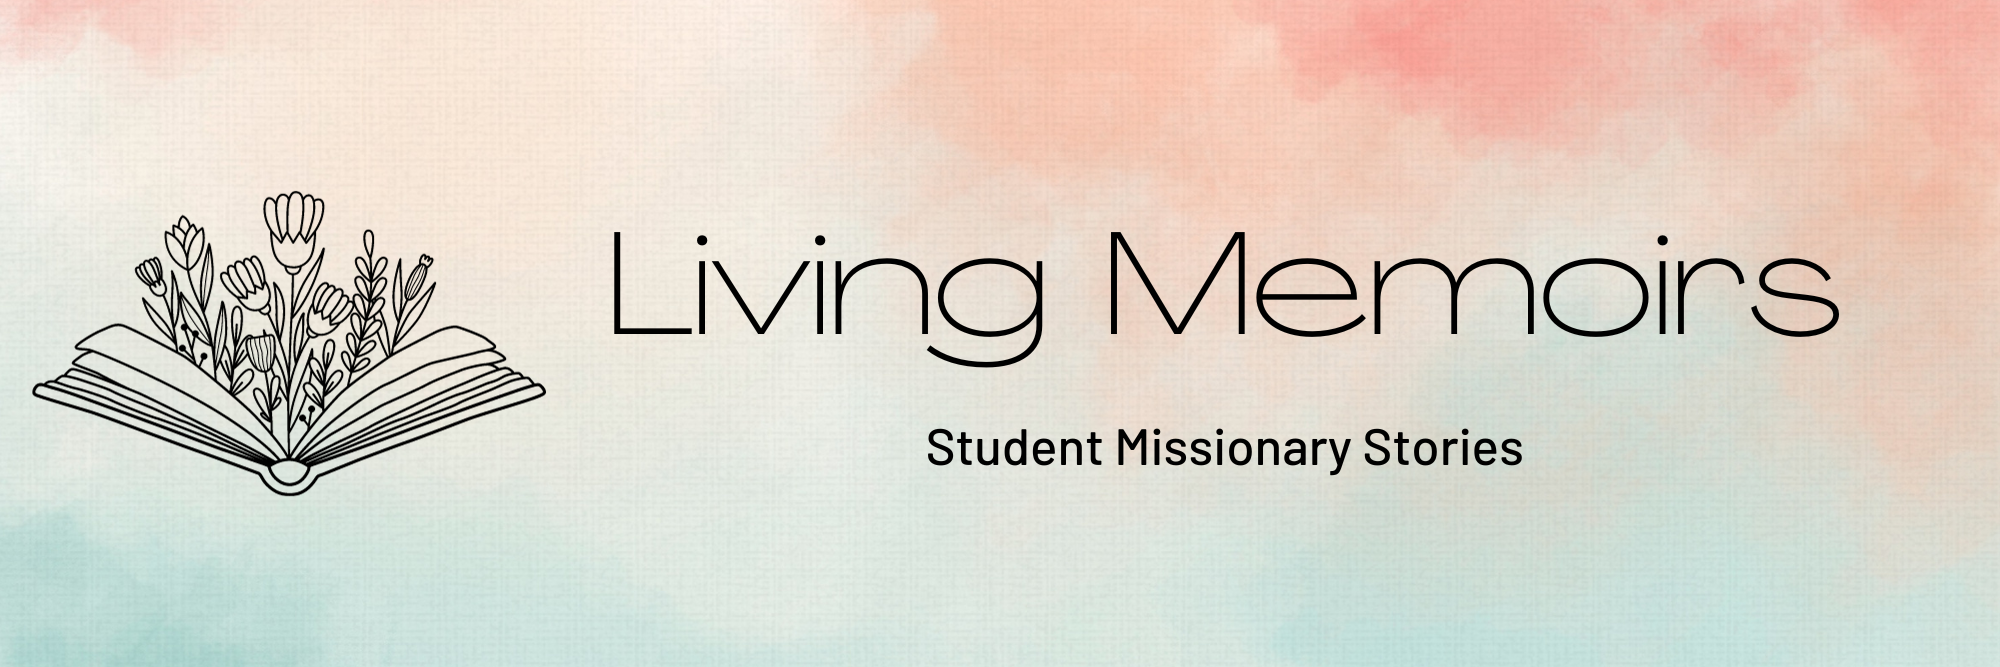 Student Missionary Stories